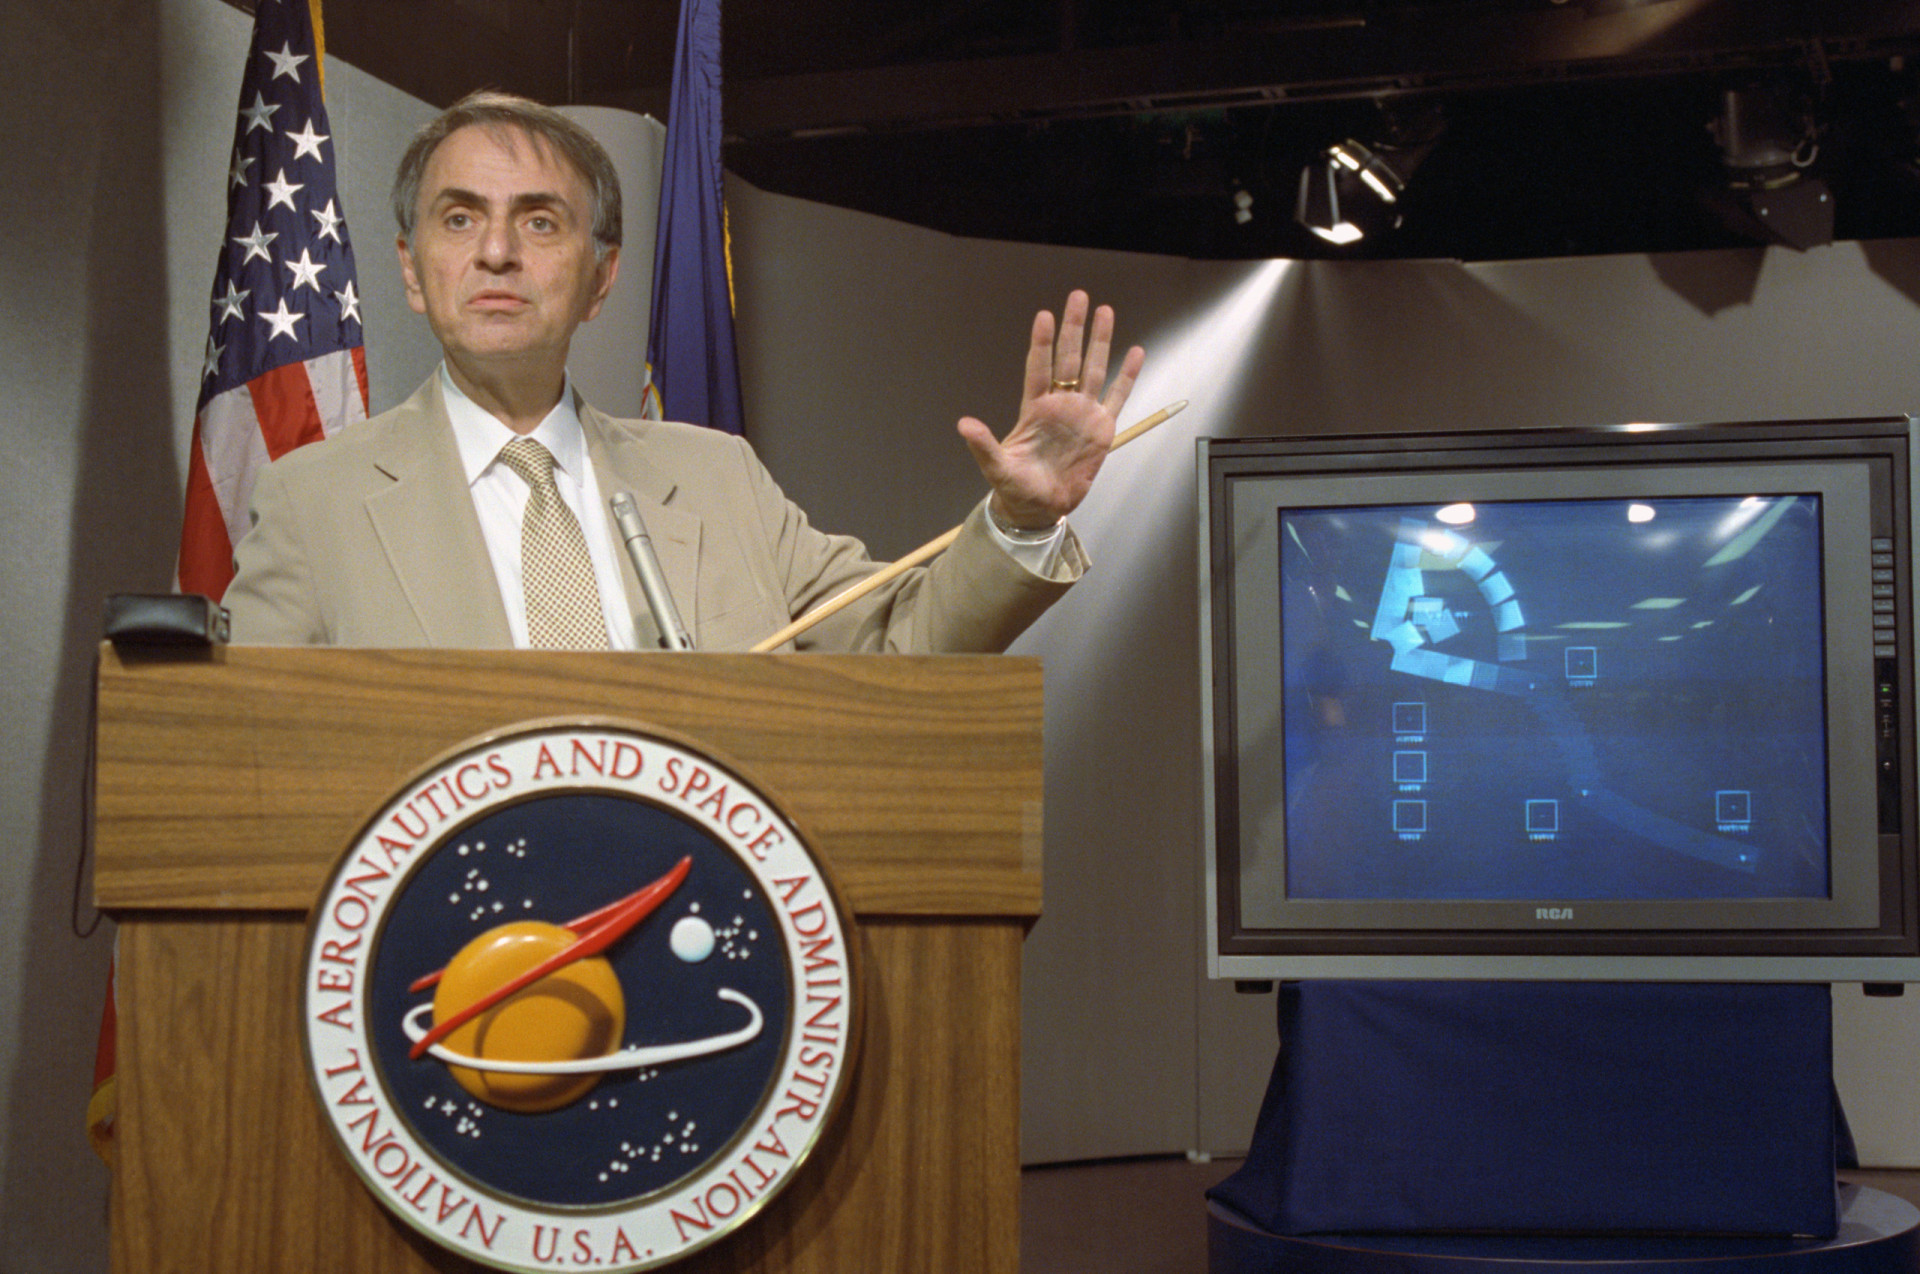 <p>Carl Sagan mentioned the project when he applied for a Miller Institute graduate fellowship at Berkeley in 1959. The project was then mentioned in Sagan's biography published in the '90s.</p>